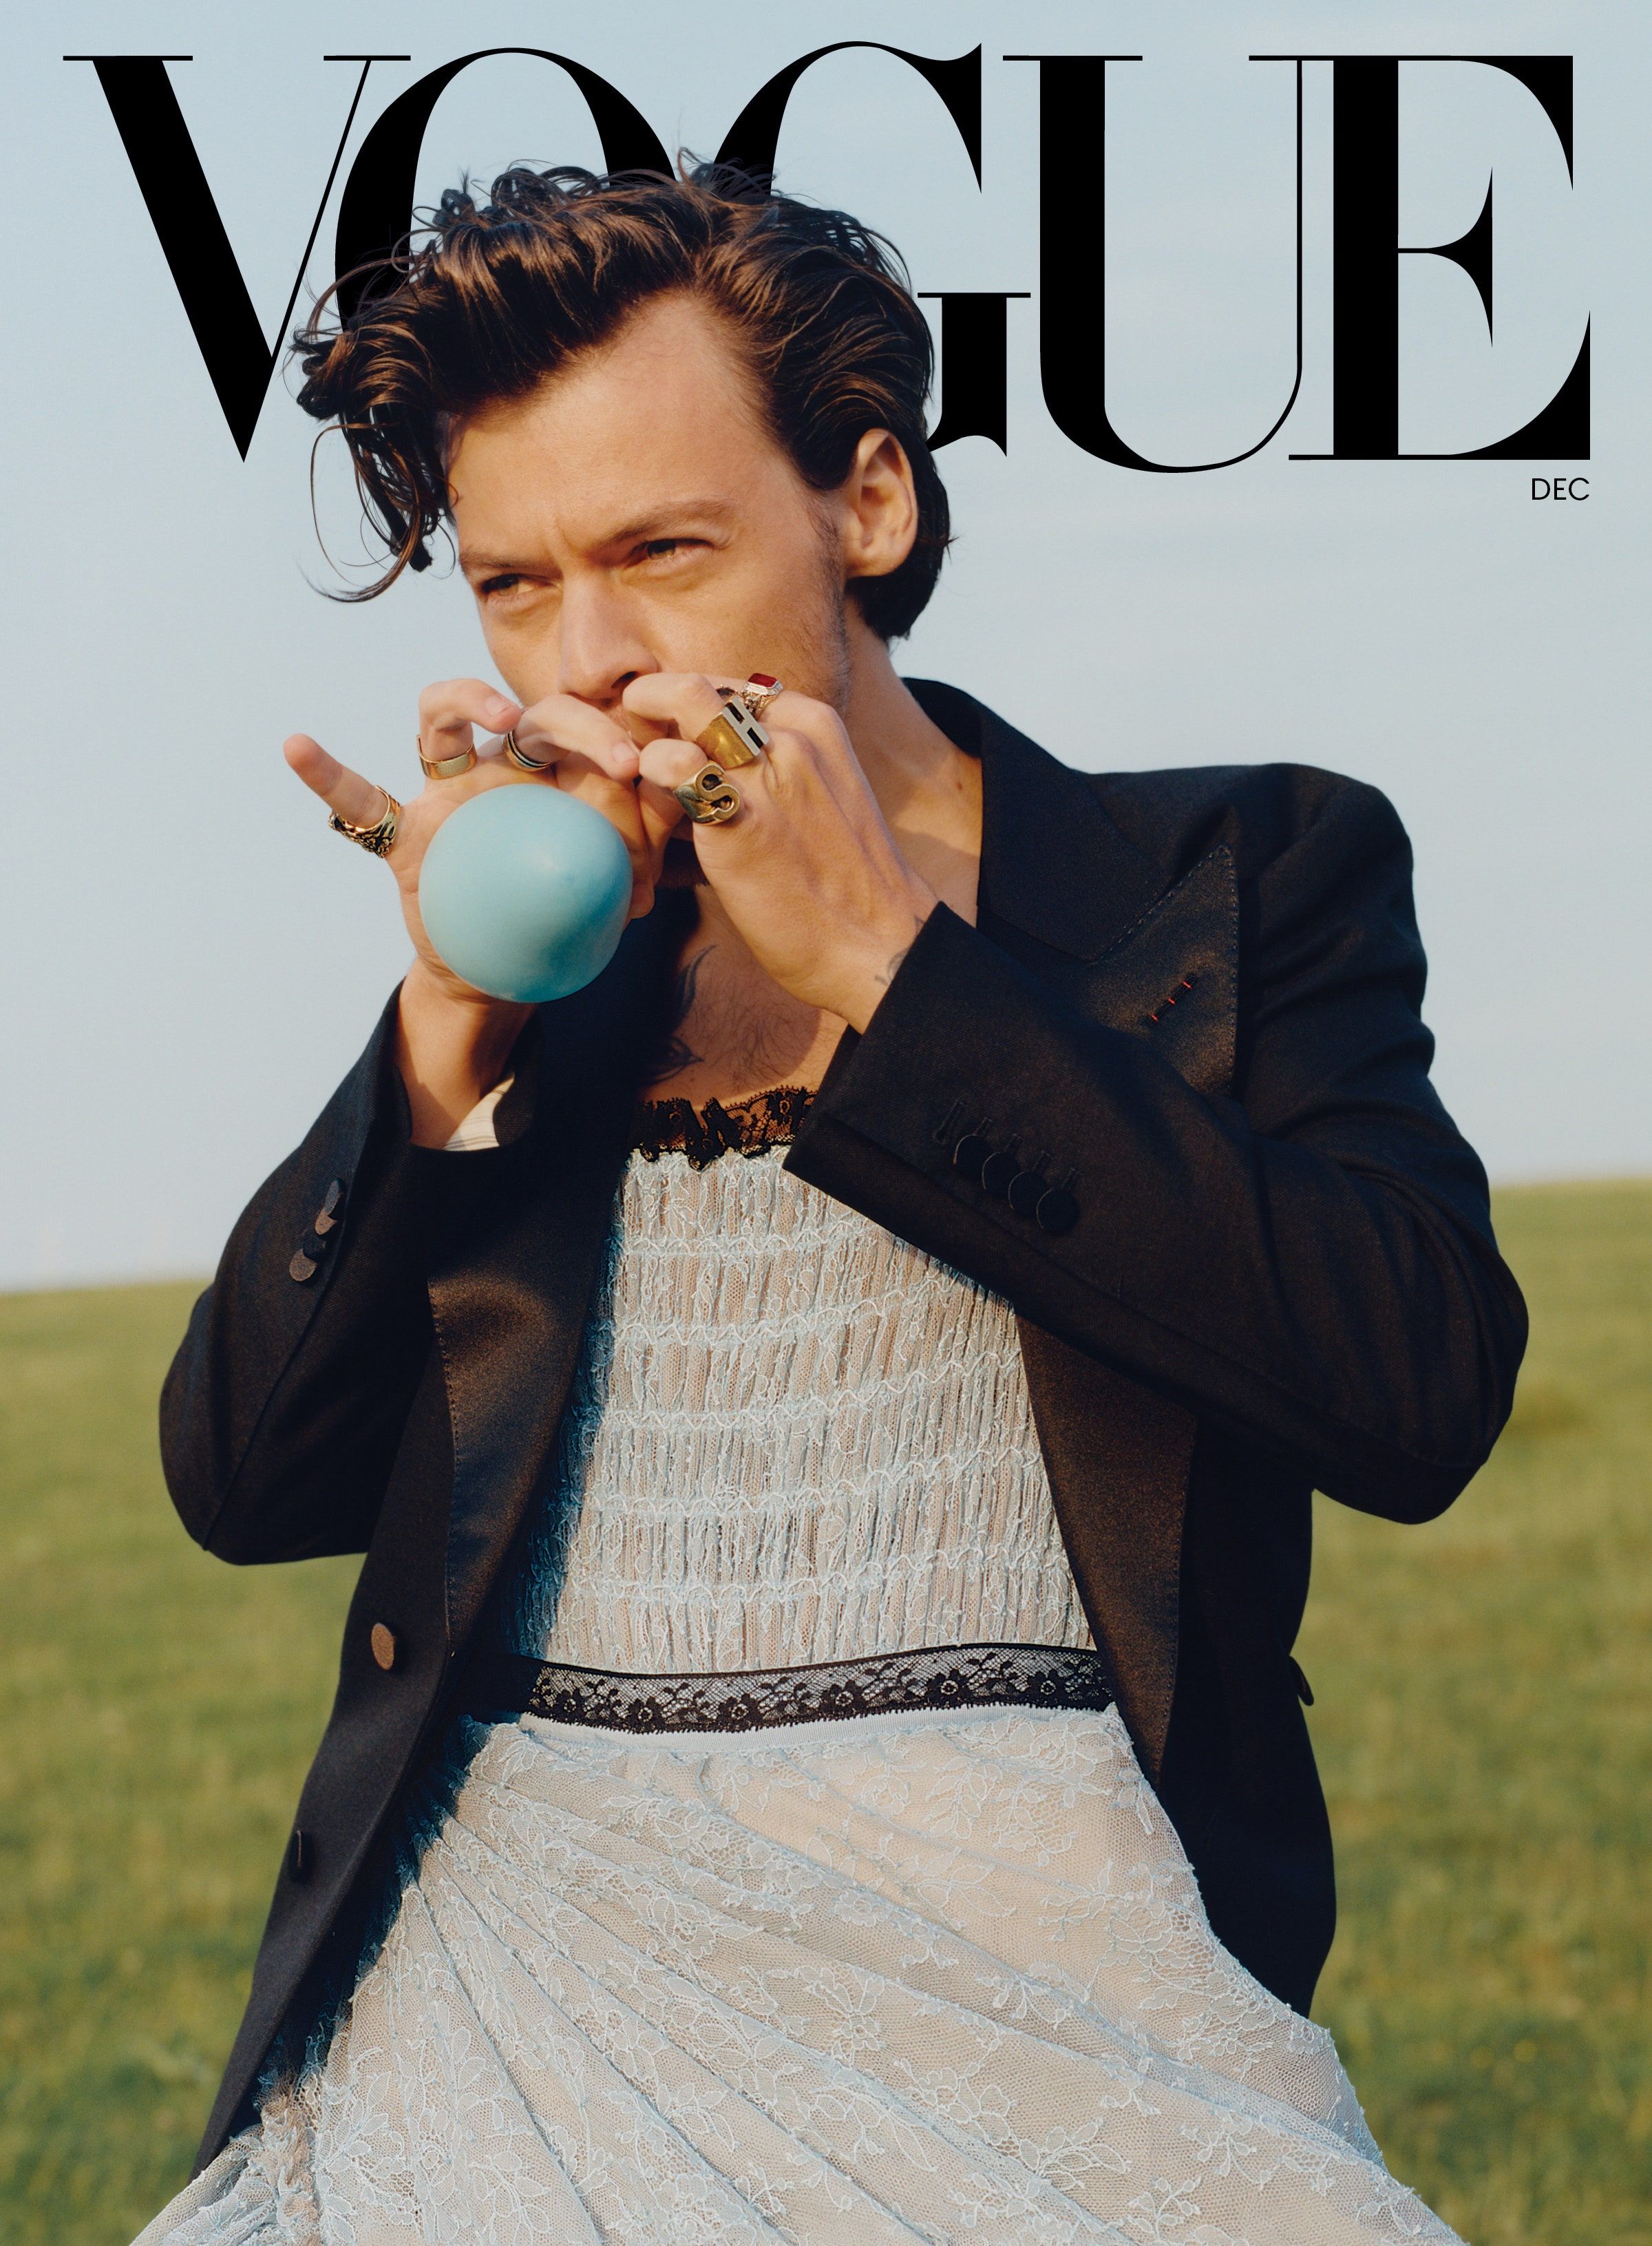 Harry Styles 2021 Wallpapers - Wallpaper Cave